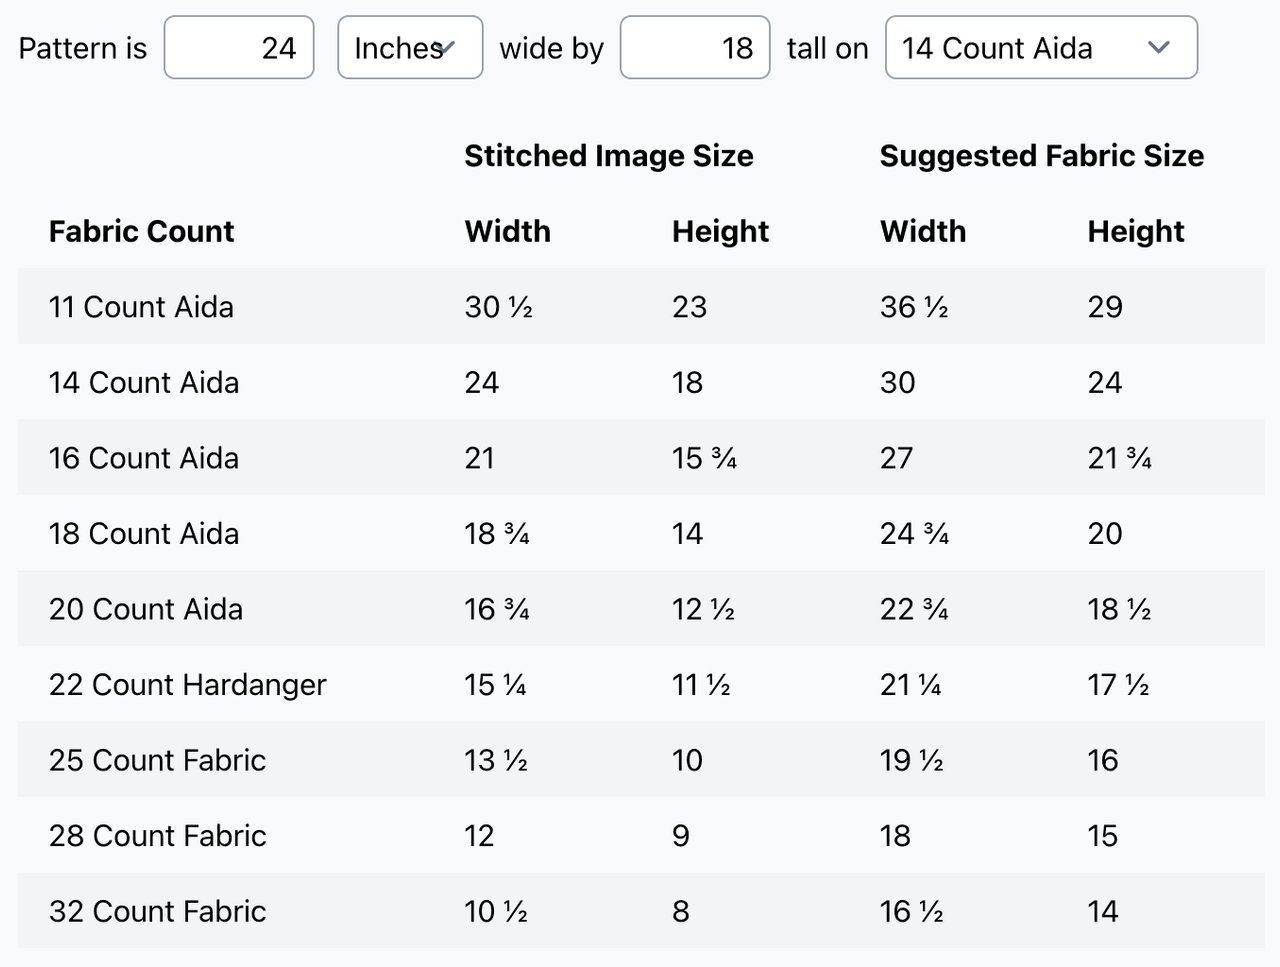 Calculate fabric size for different stitch counts based on pattern dimensions